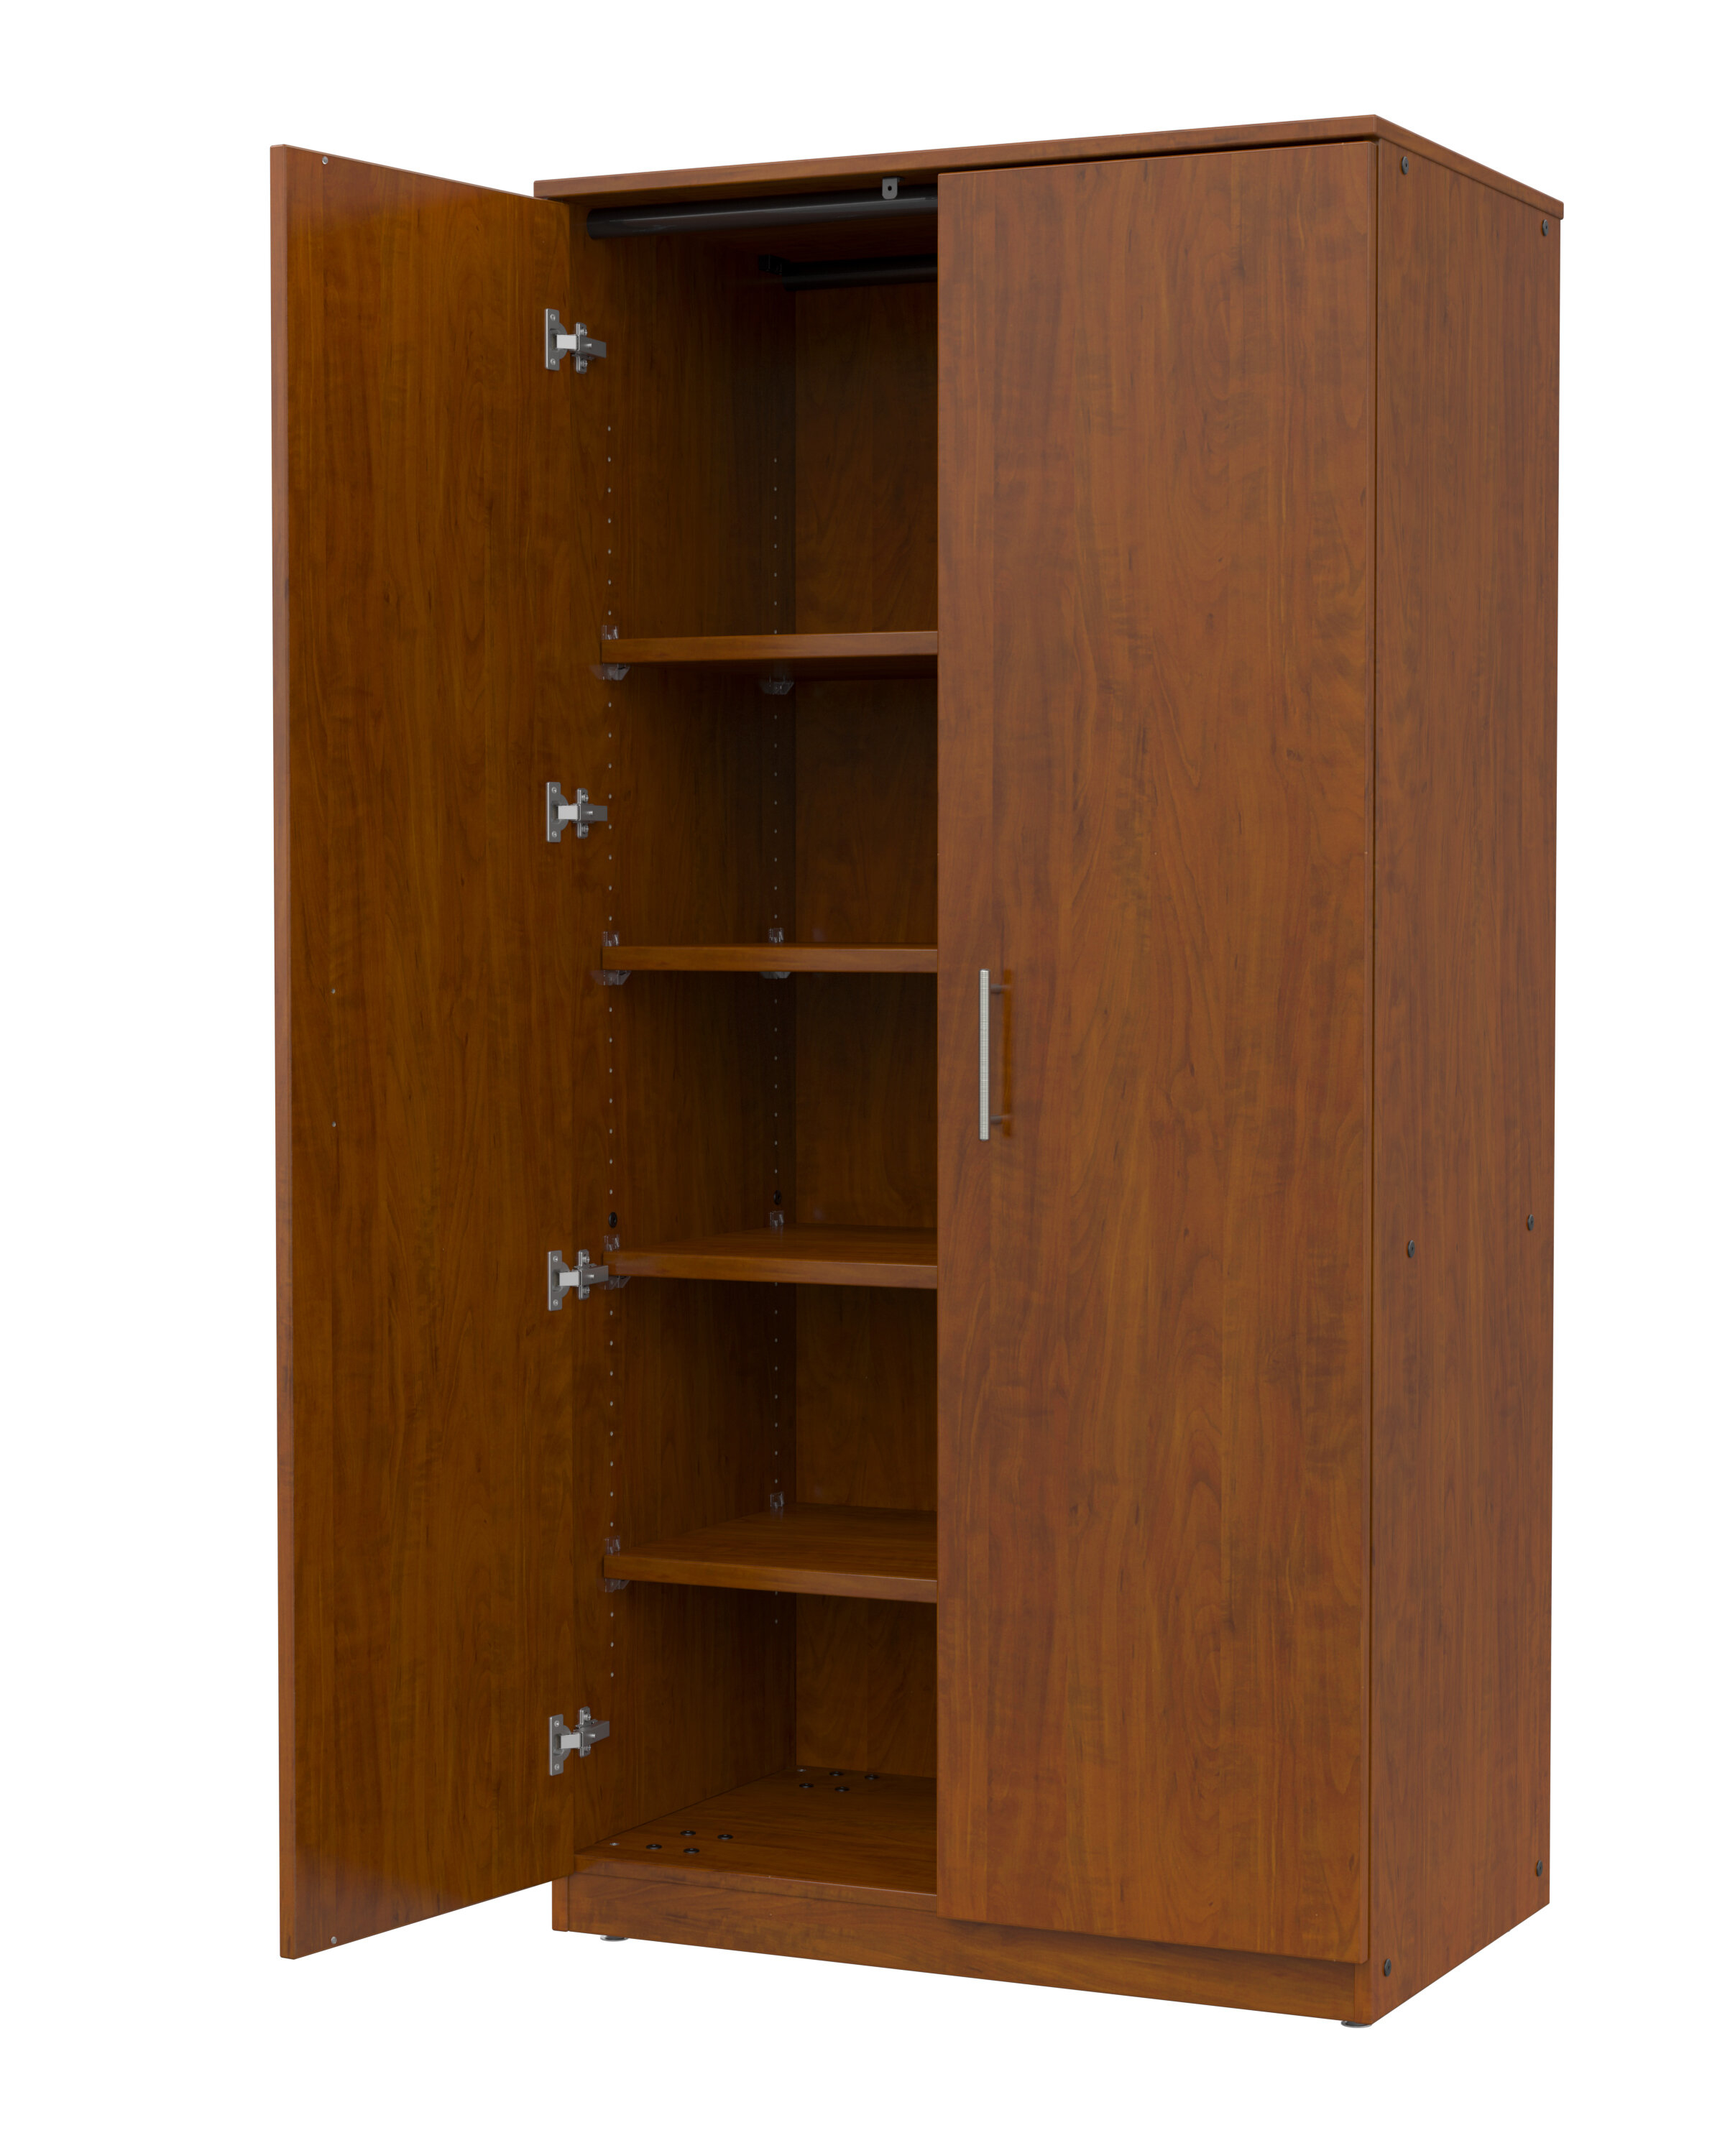 Storage Cabinets With Doors Visualhunt, Solid Wood Storage Cabinet With Doors